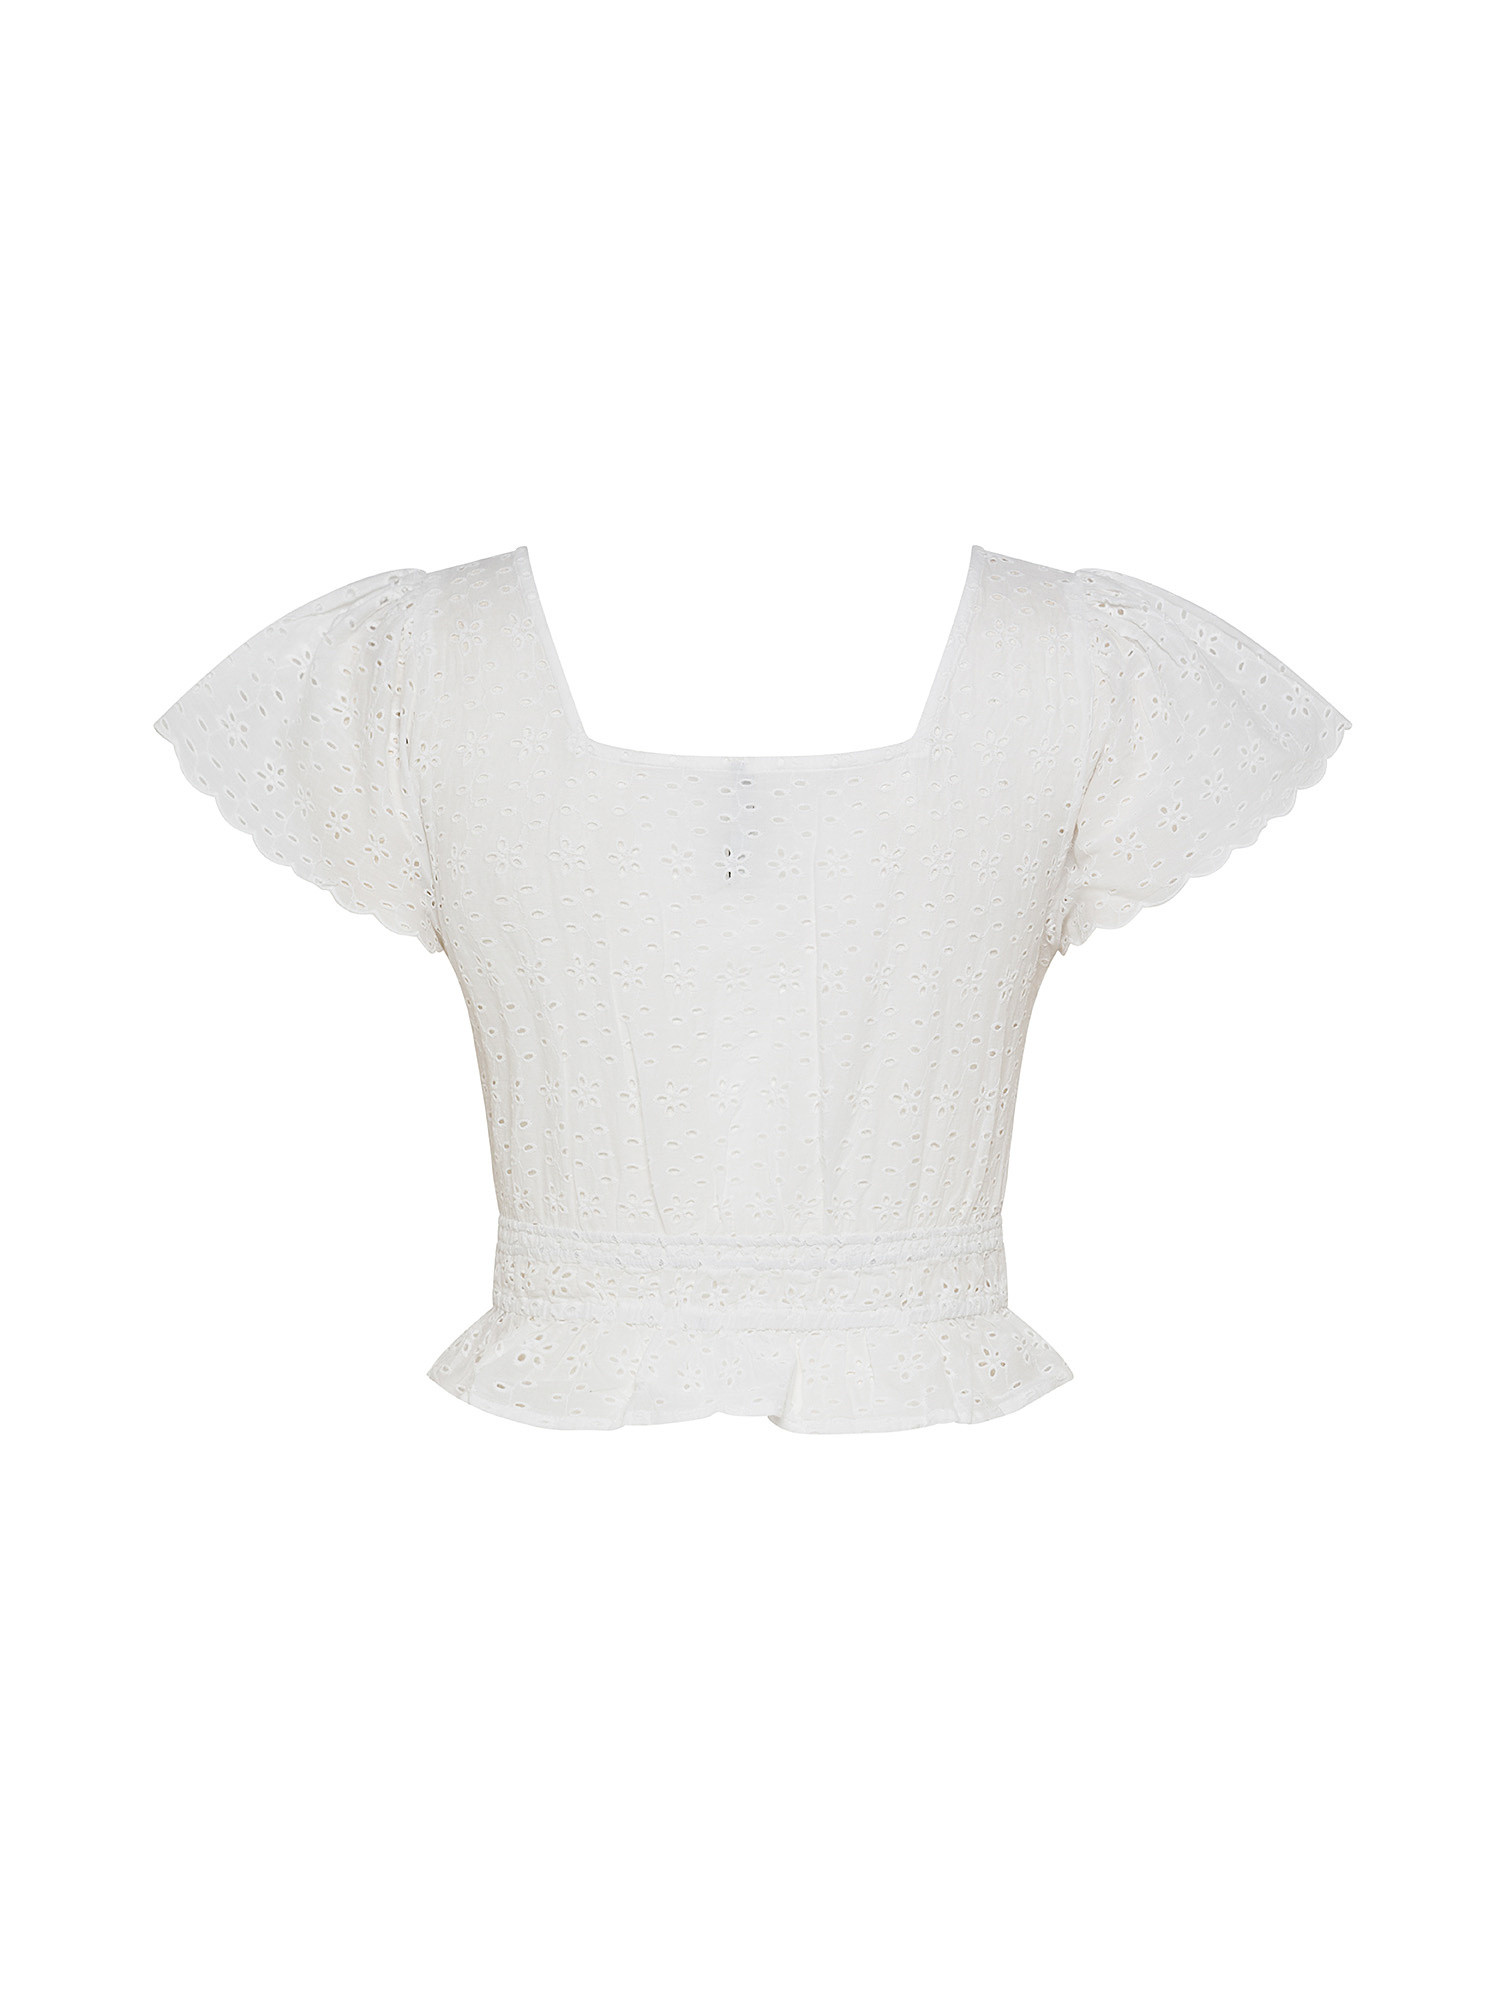 Pepe Jeans - Top in pizzo sangallo in cotone, Bianco, large image number 1